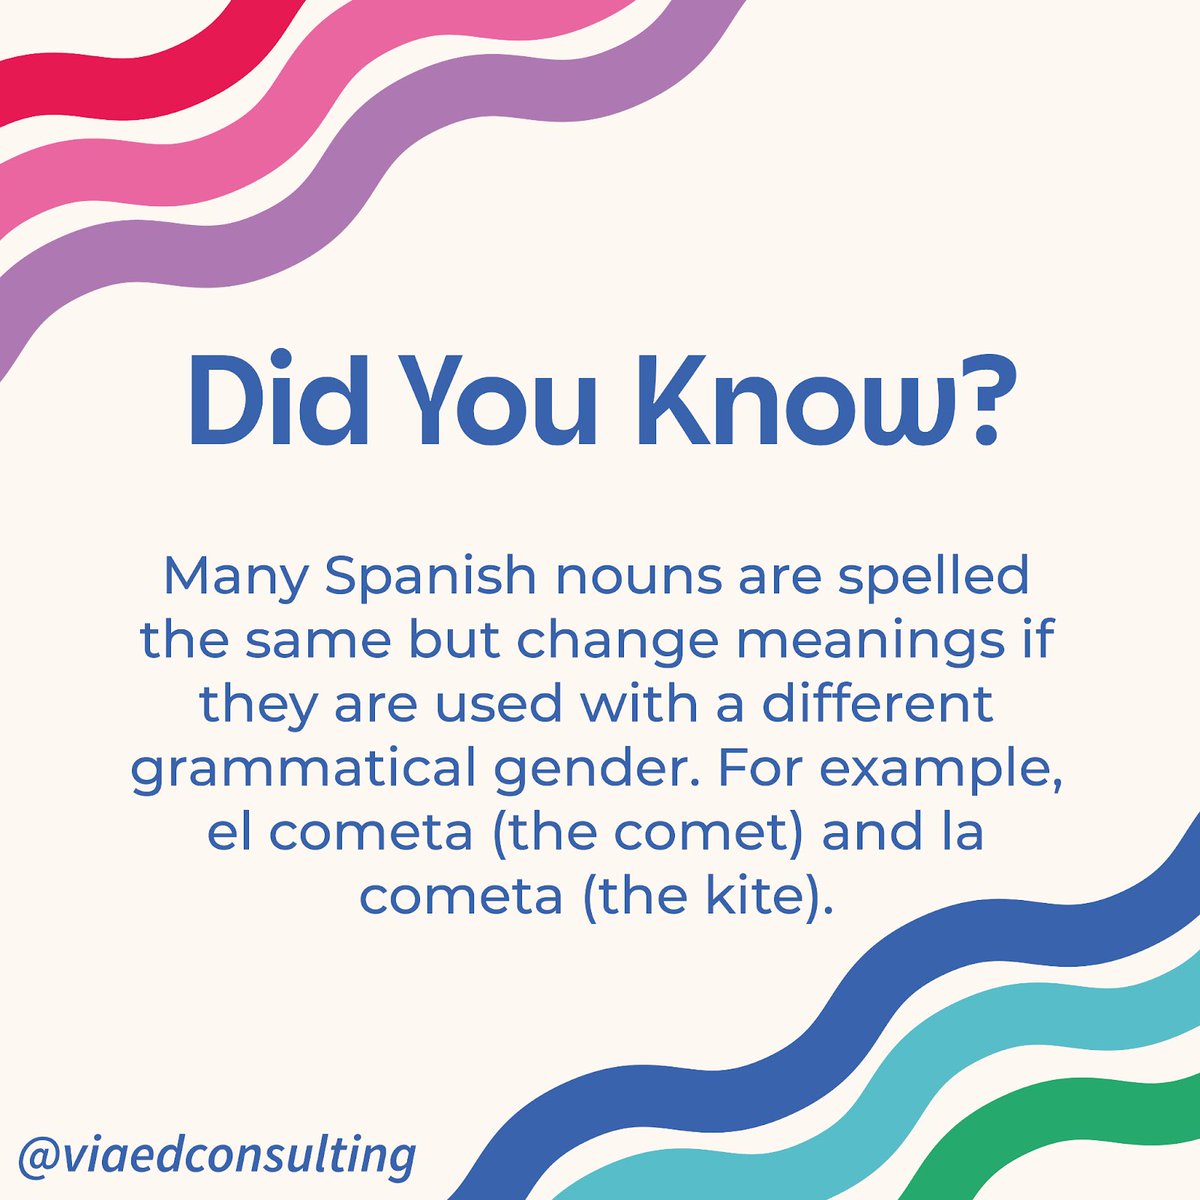 Why do Spanish nouns change meaning based on grammatical gender? It’s about how language reflects our perception. Take ‘el frente’ and ‘la frente’ for instance. The masculine ‘frente’ refers to a physical front, while the feminine ‘frente’ points to a part of the body.🧠💡 #TRIS